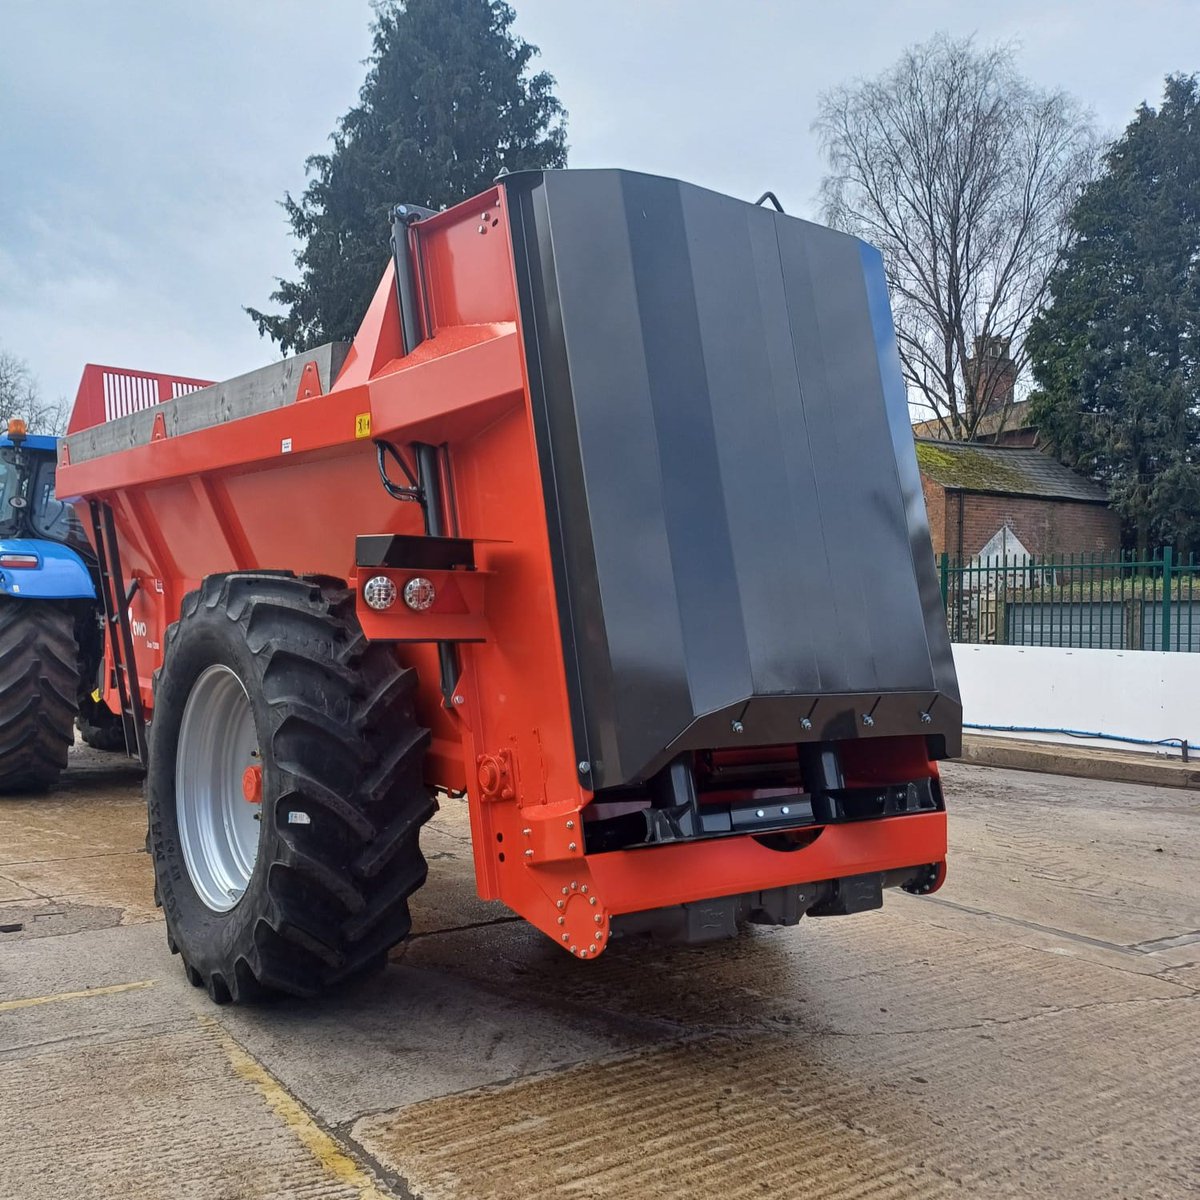 New K-Two 12 Ton muck spreader leaving T H WHITE Marlborough earlier this week complete with rear cover for spreading chicken muck 

#ktwo #muckspreader #spreader #agriculture #agriculutralequipment #farming #farminguk #britishfarming #farminglife